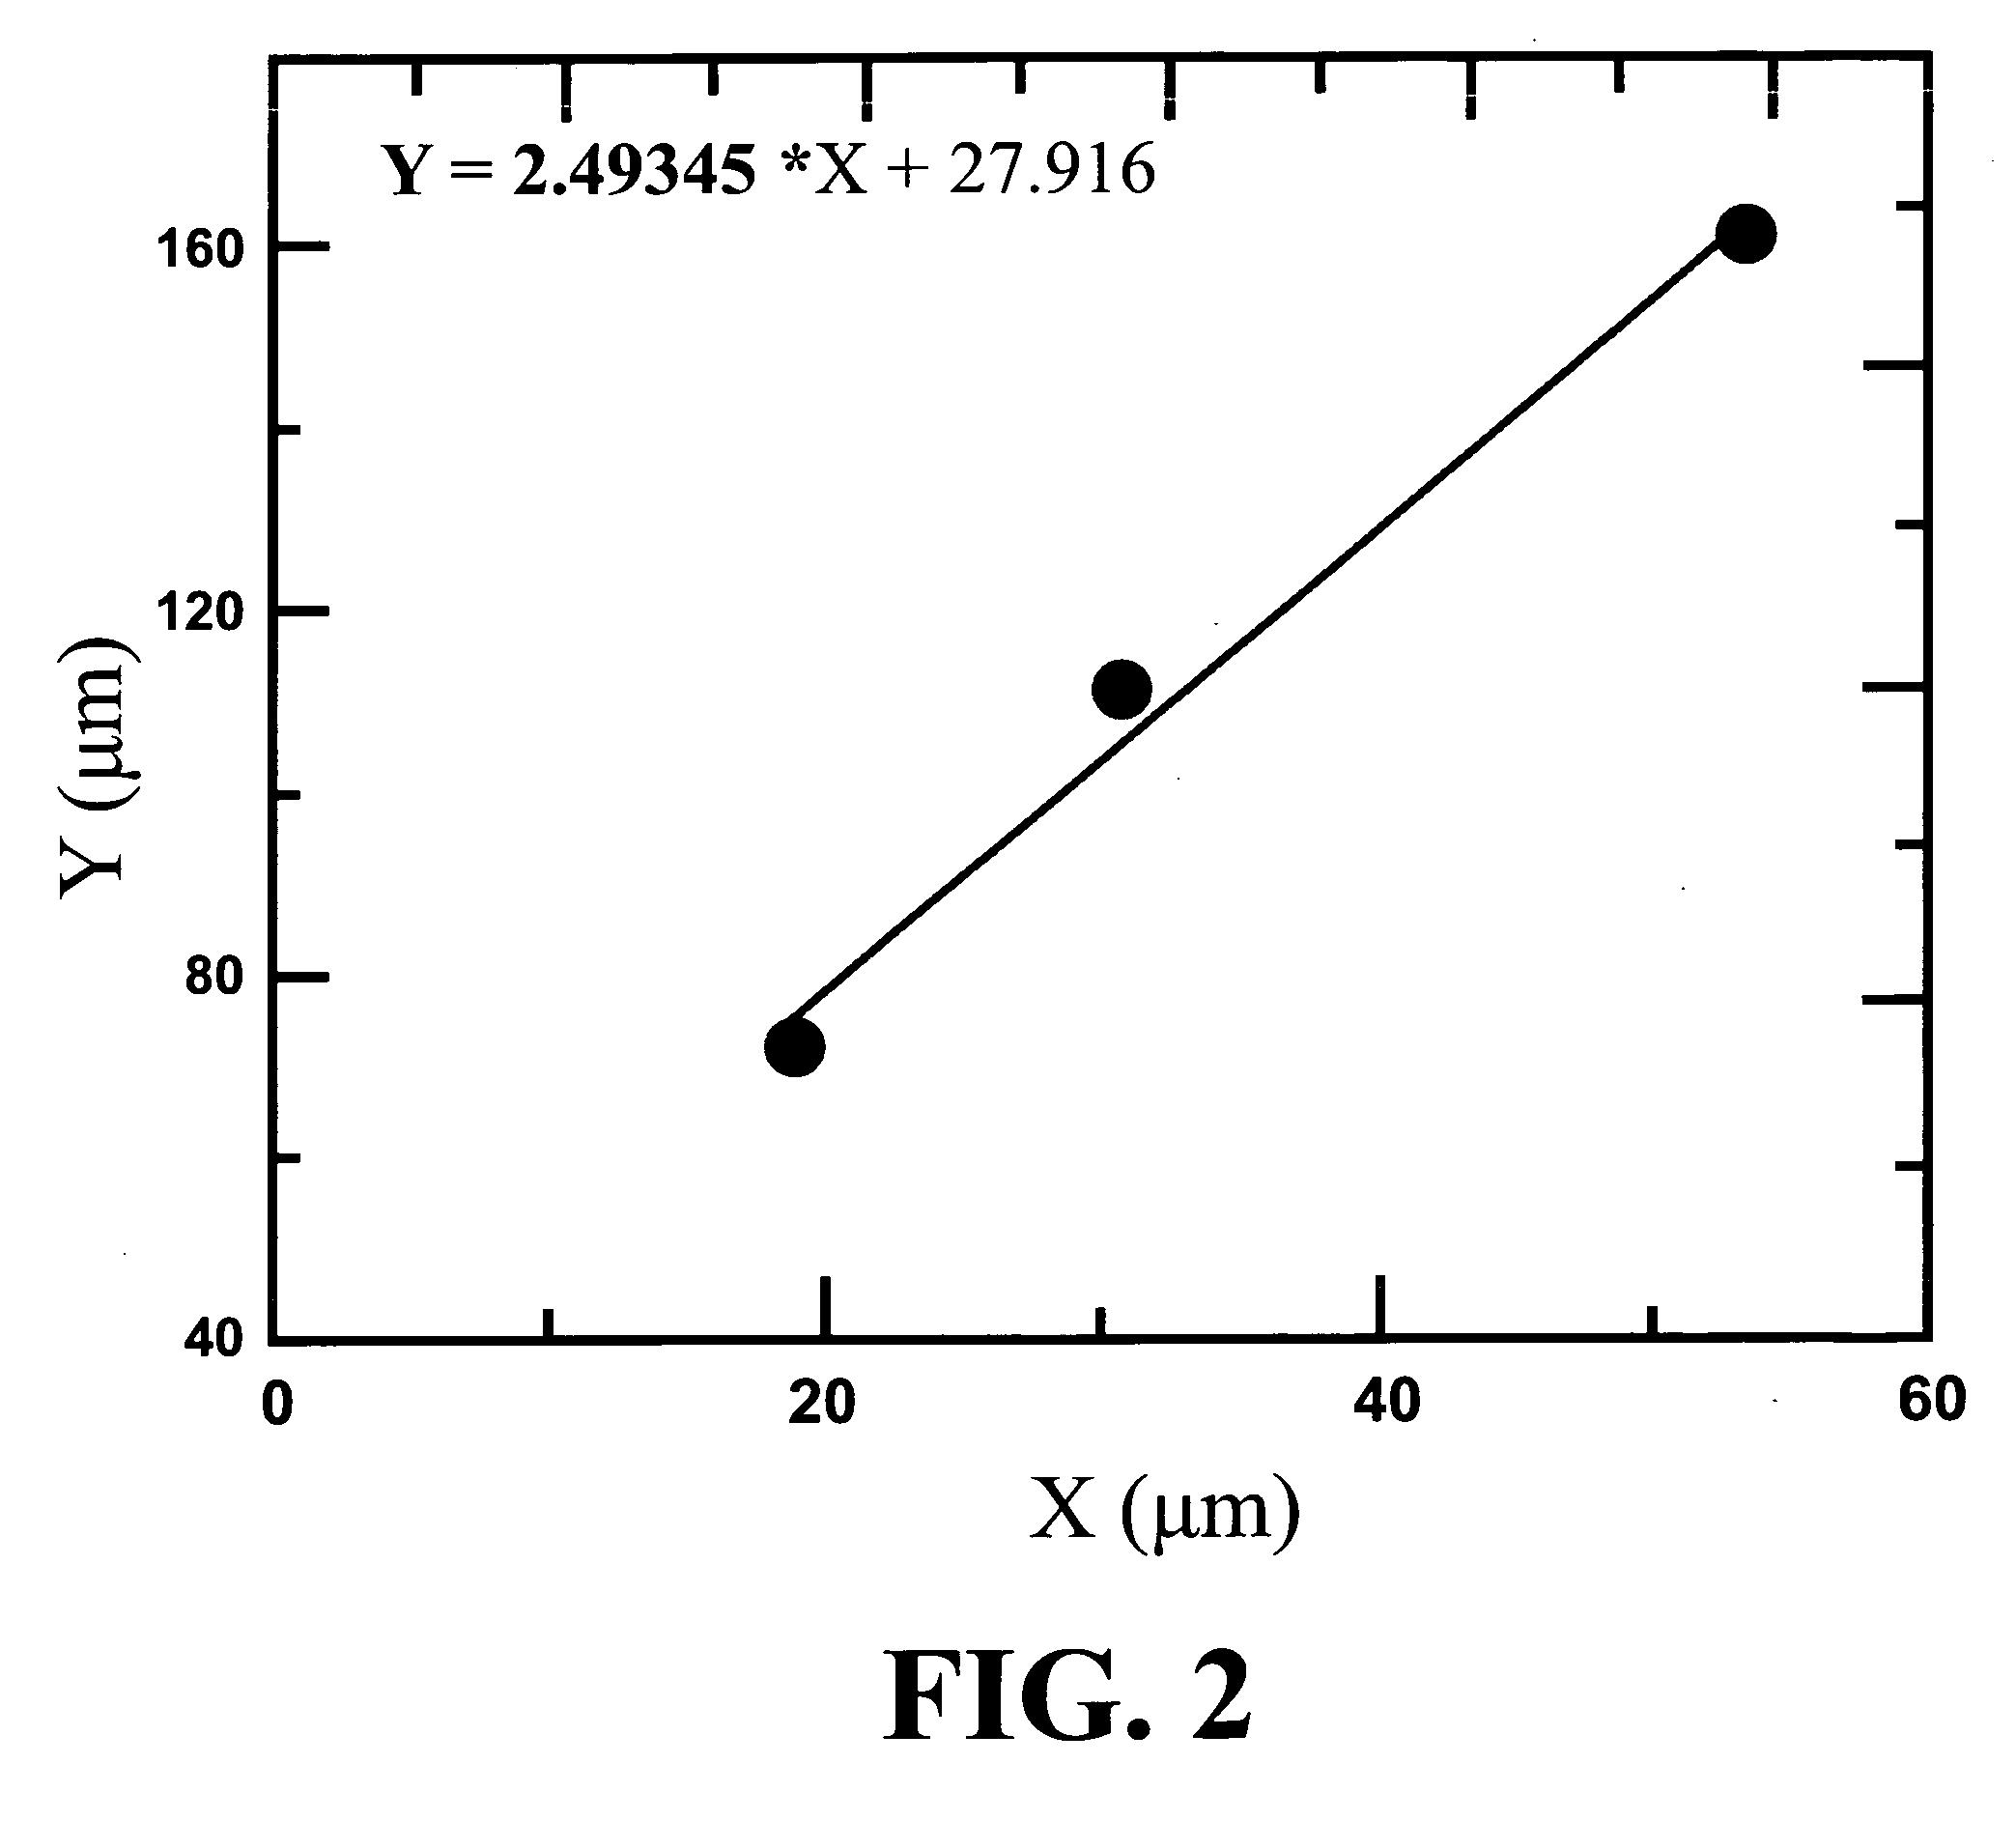 Method of preventing the induction of aberrations in laser refractive surgery systems